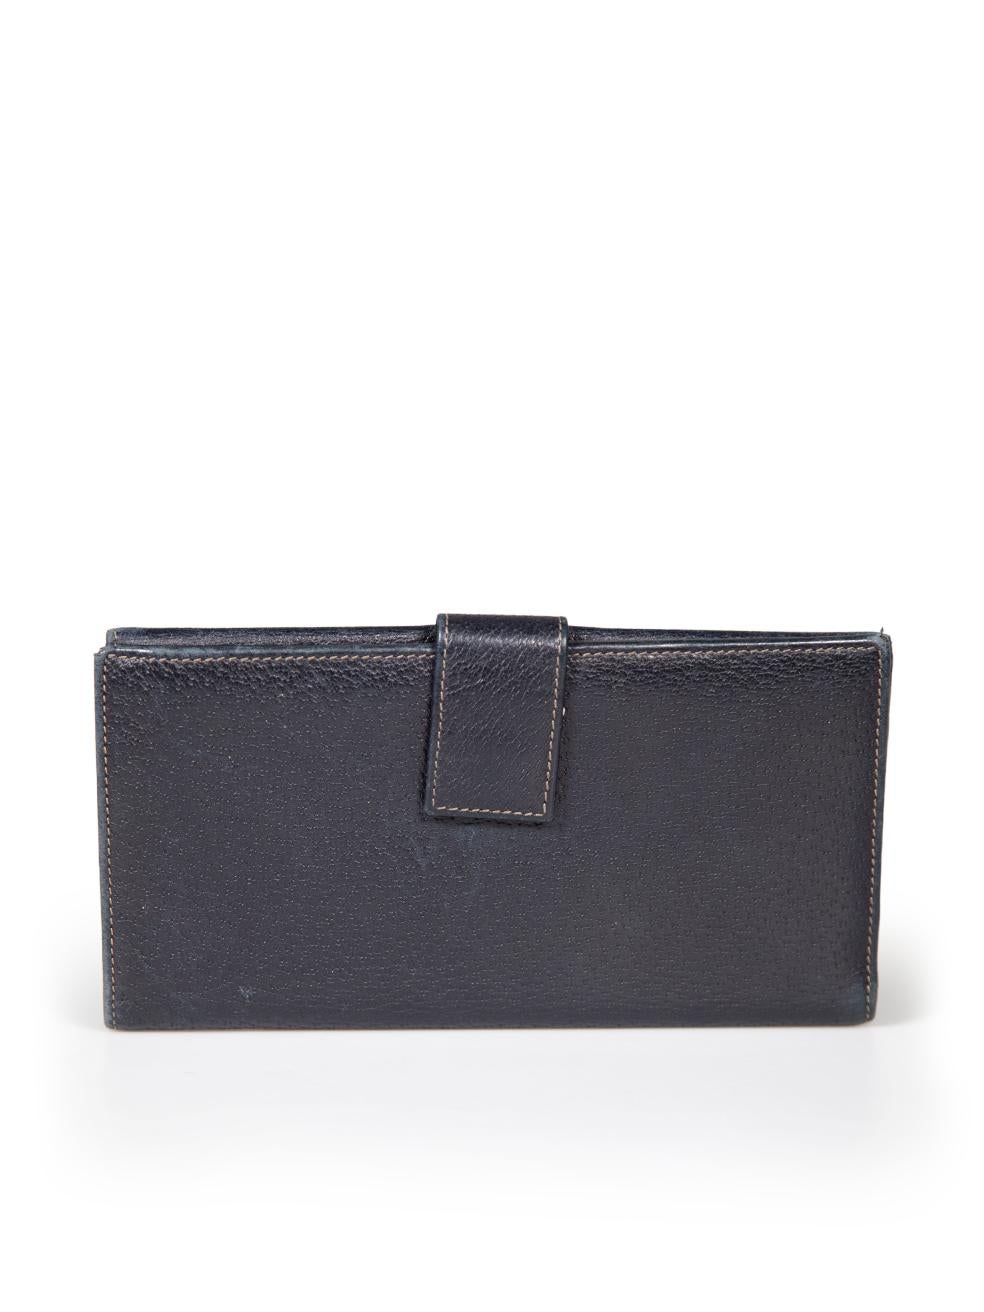 Gucci Navy Leather Long Wallet In Good Condition For Sale In London, GB